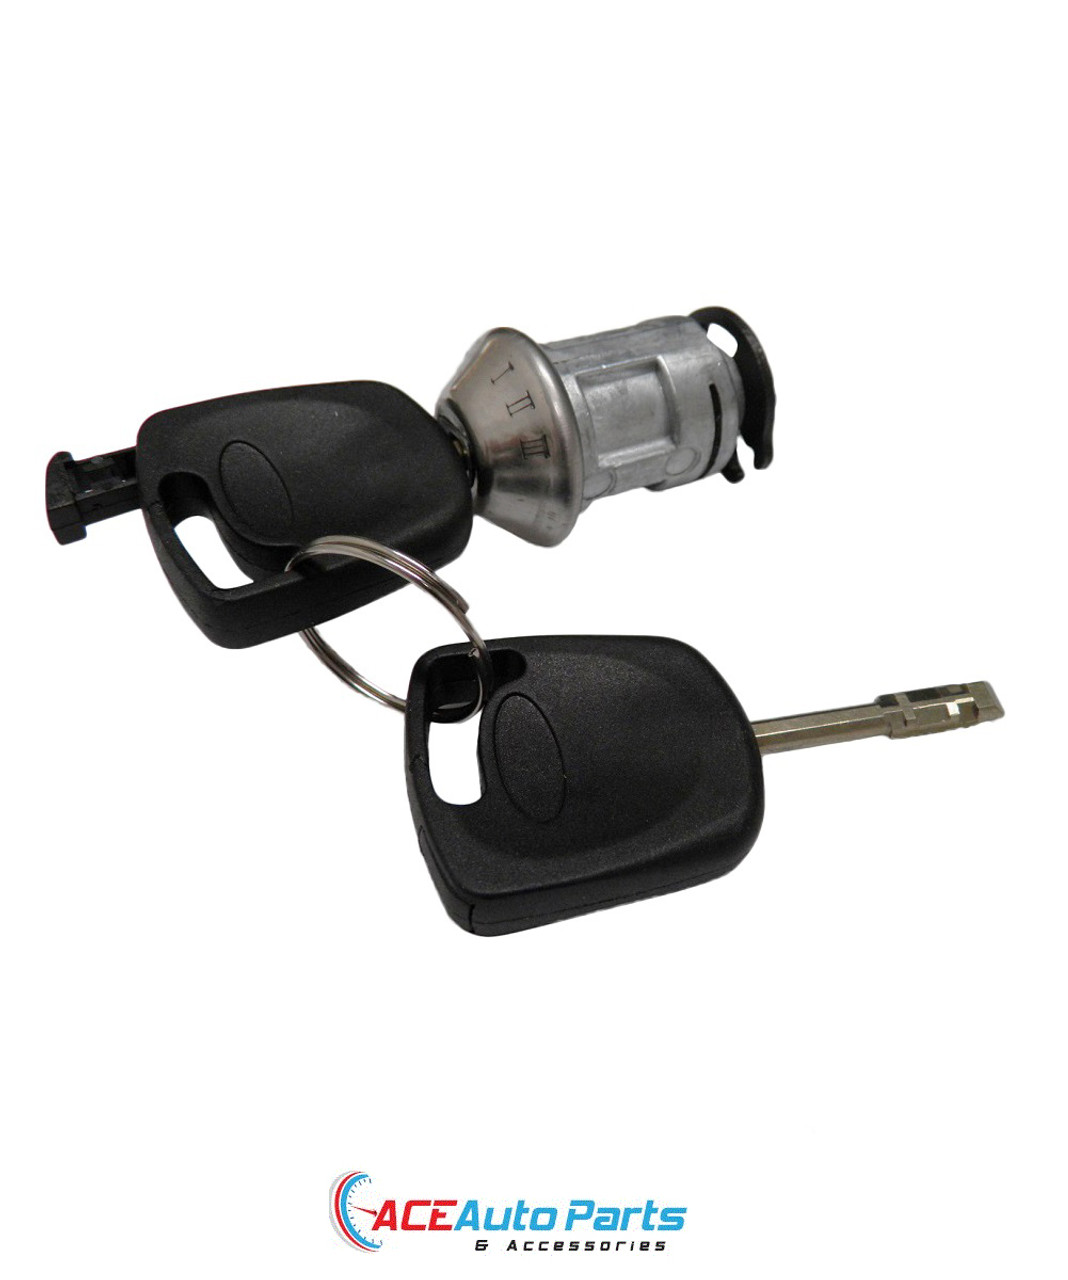 Ignition barrel for Ford AU+BA series. New with 2 keys